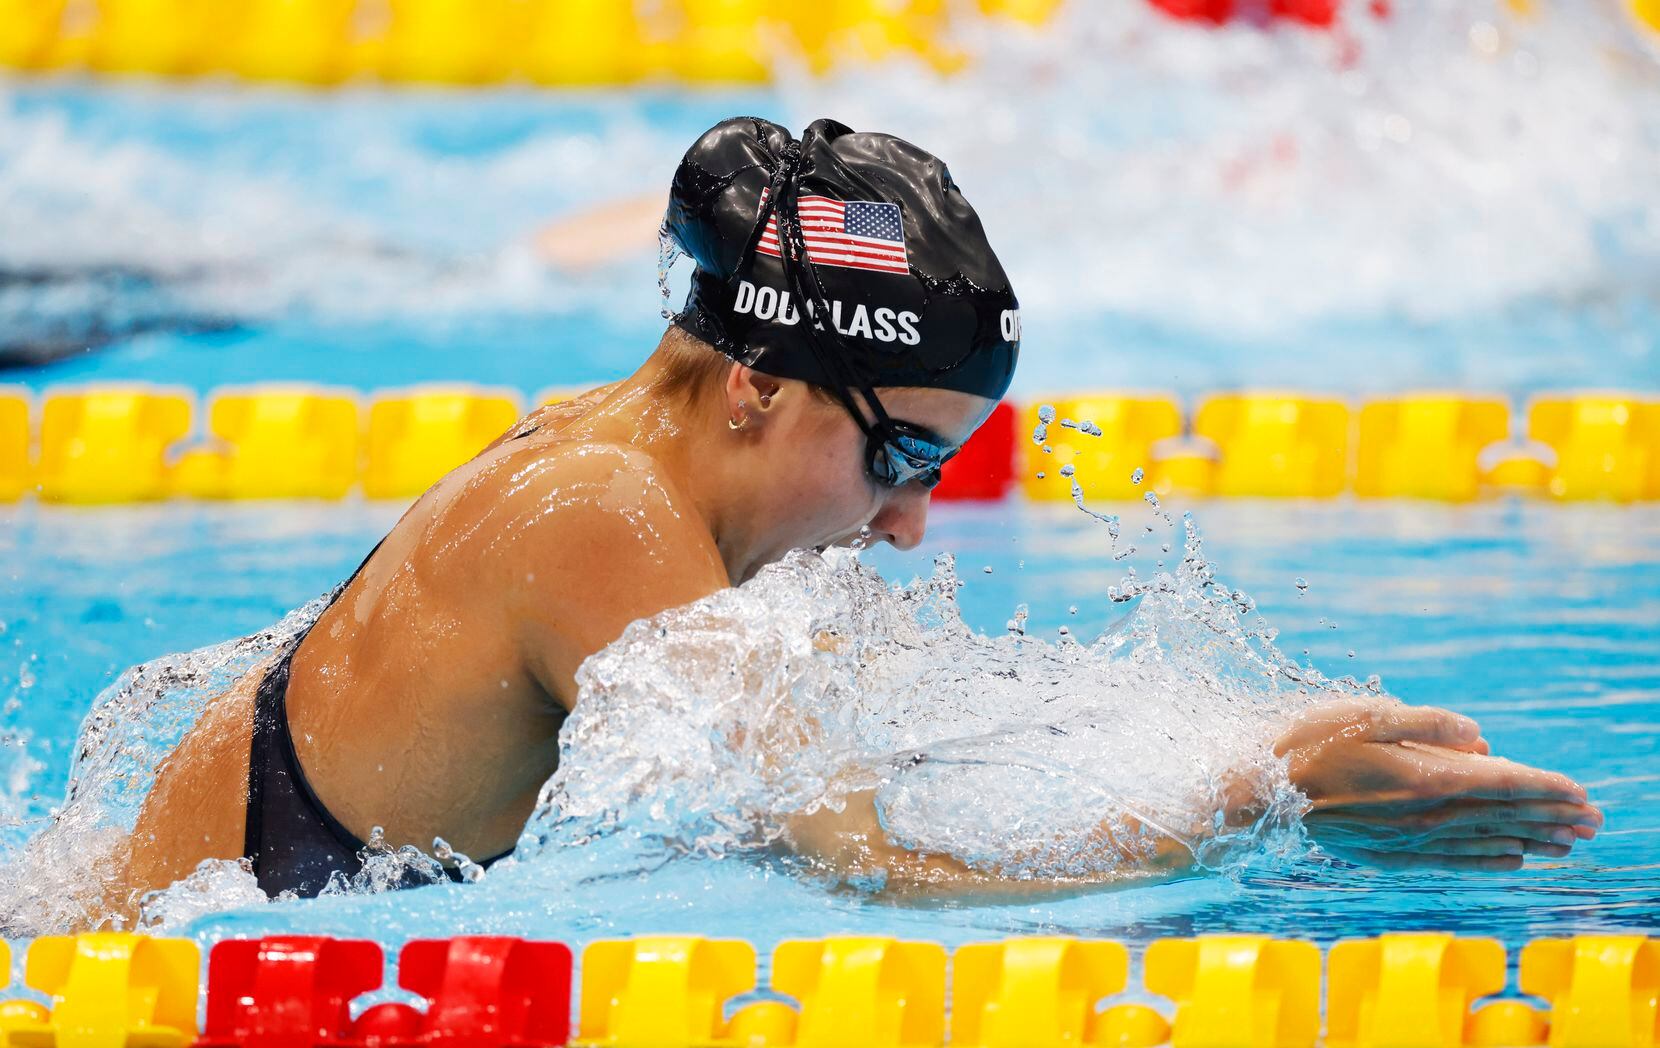 Team USA swimmer Kate Douglass sped through her lane in the women’s 200 meter individual medley semifinal in Tokyo. She won the bronze medal in the finals.